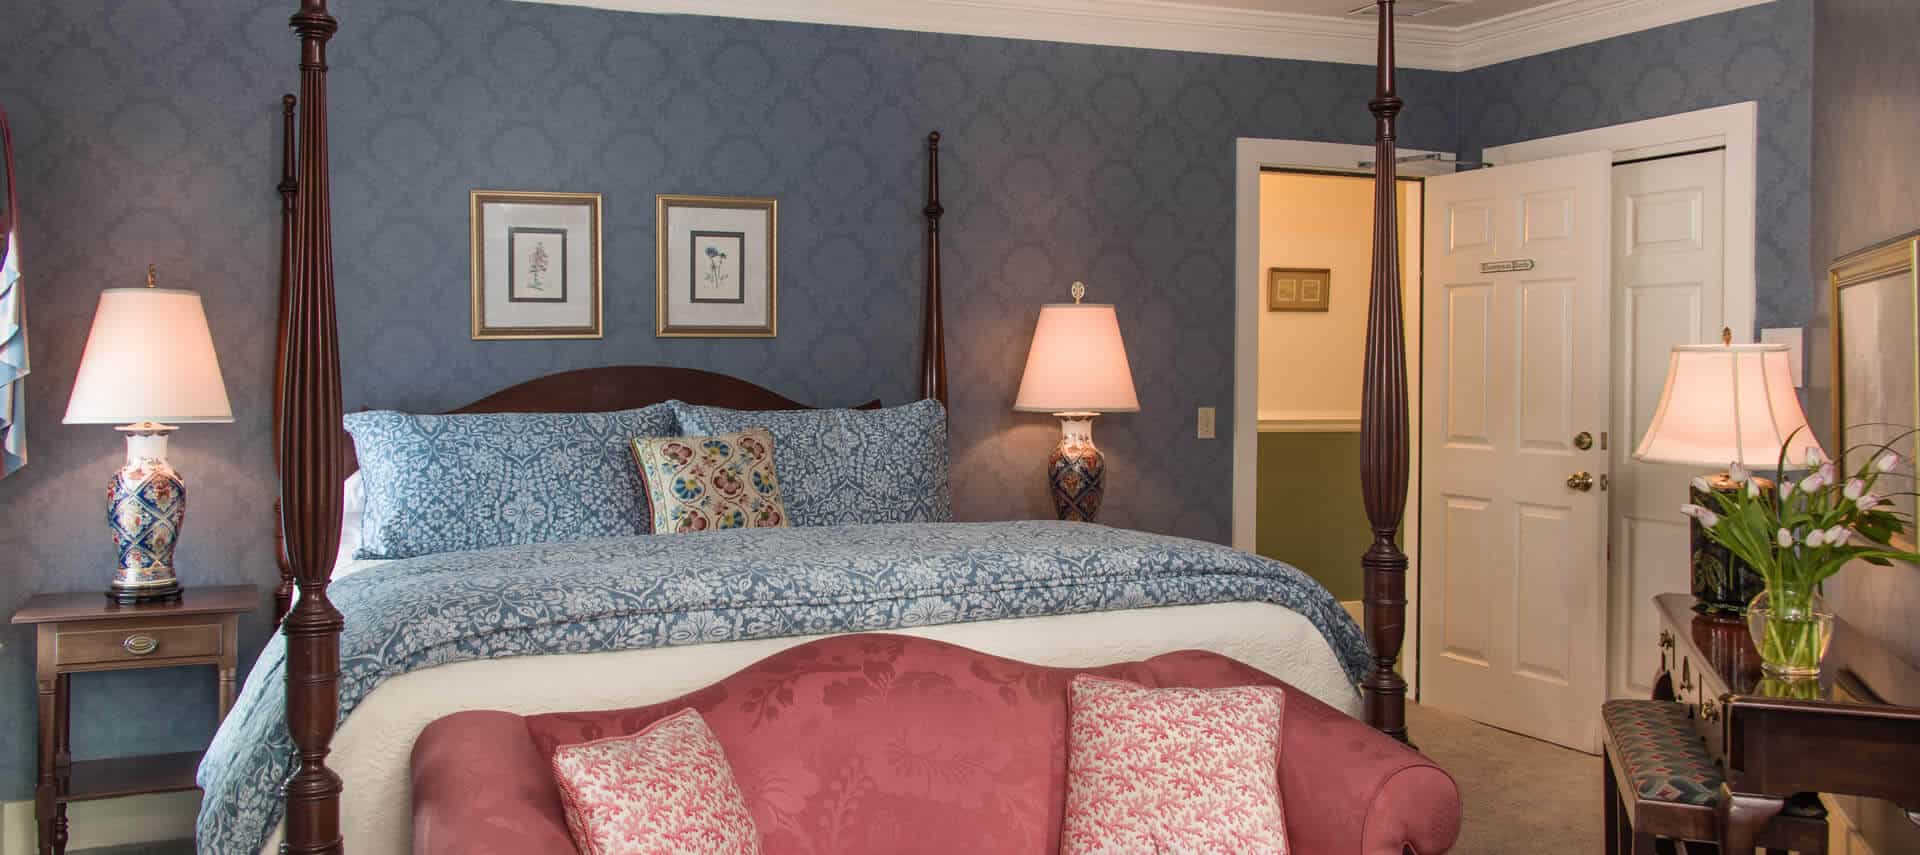 A room with blue wallpaper, a four-post bed with blue coverings, a rose damask sofa and a small wooden desk.